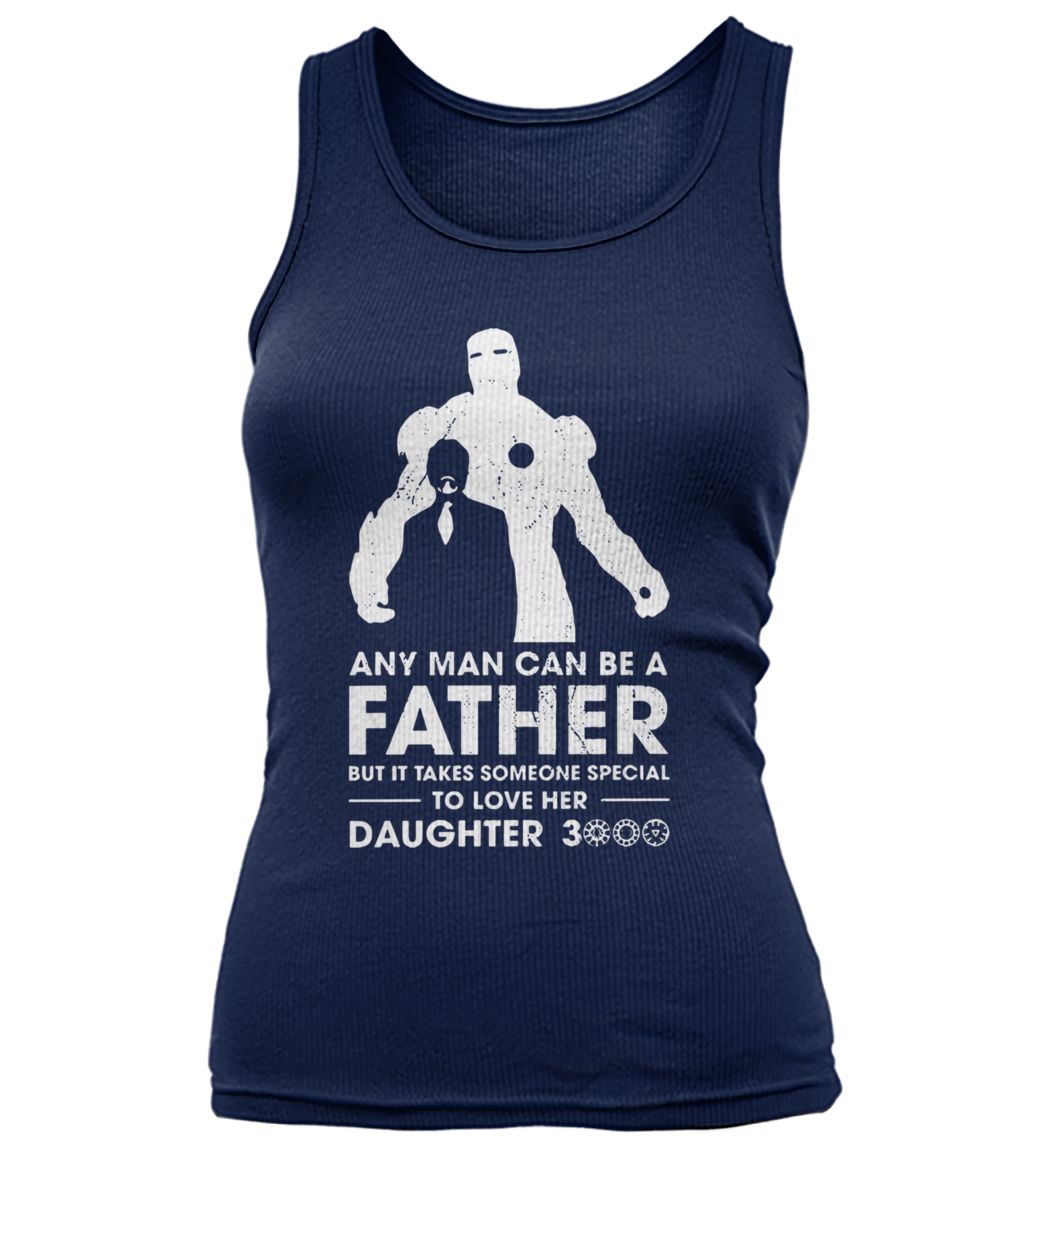 Iron man any man can be a father but it takes someone special to love her daughter 3000 women's tank top